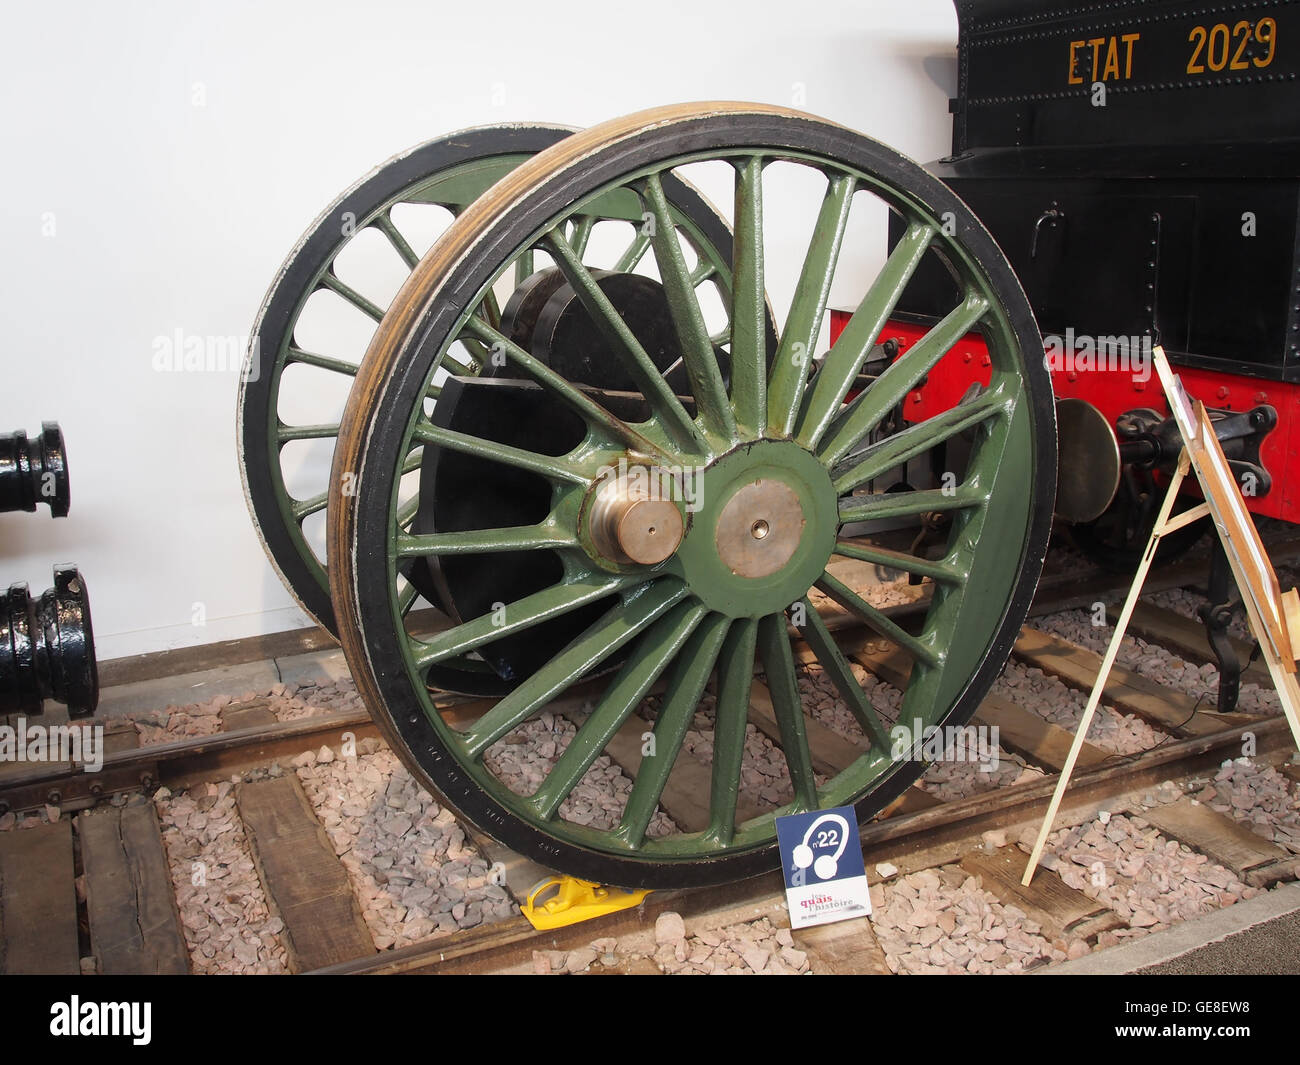 Wheels and axis of a locomotive photo 1 Stock Photo